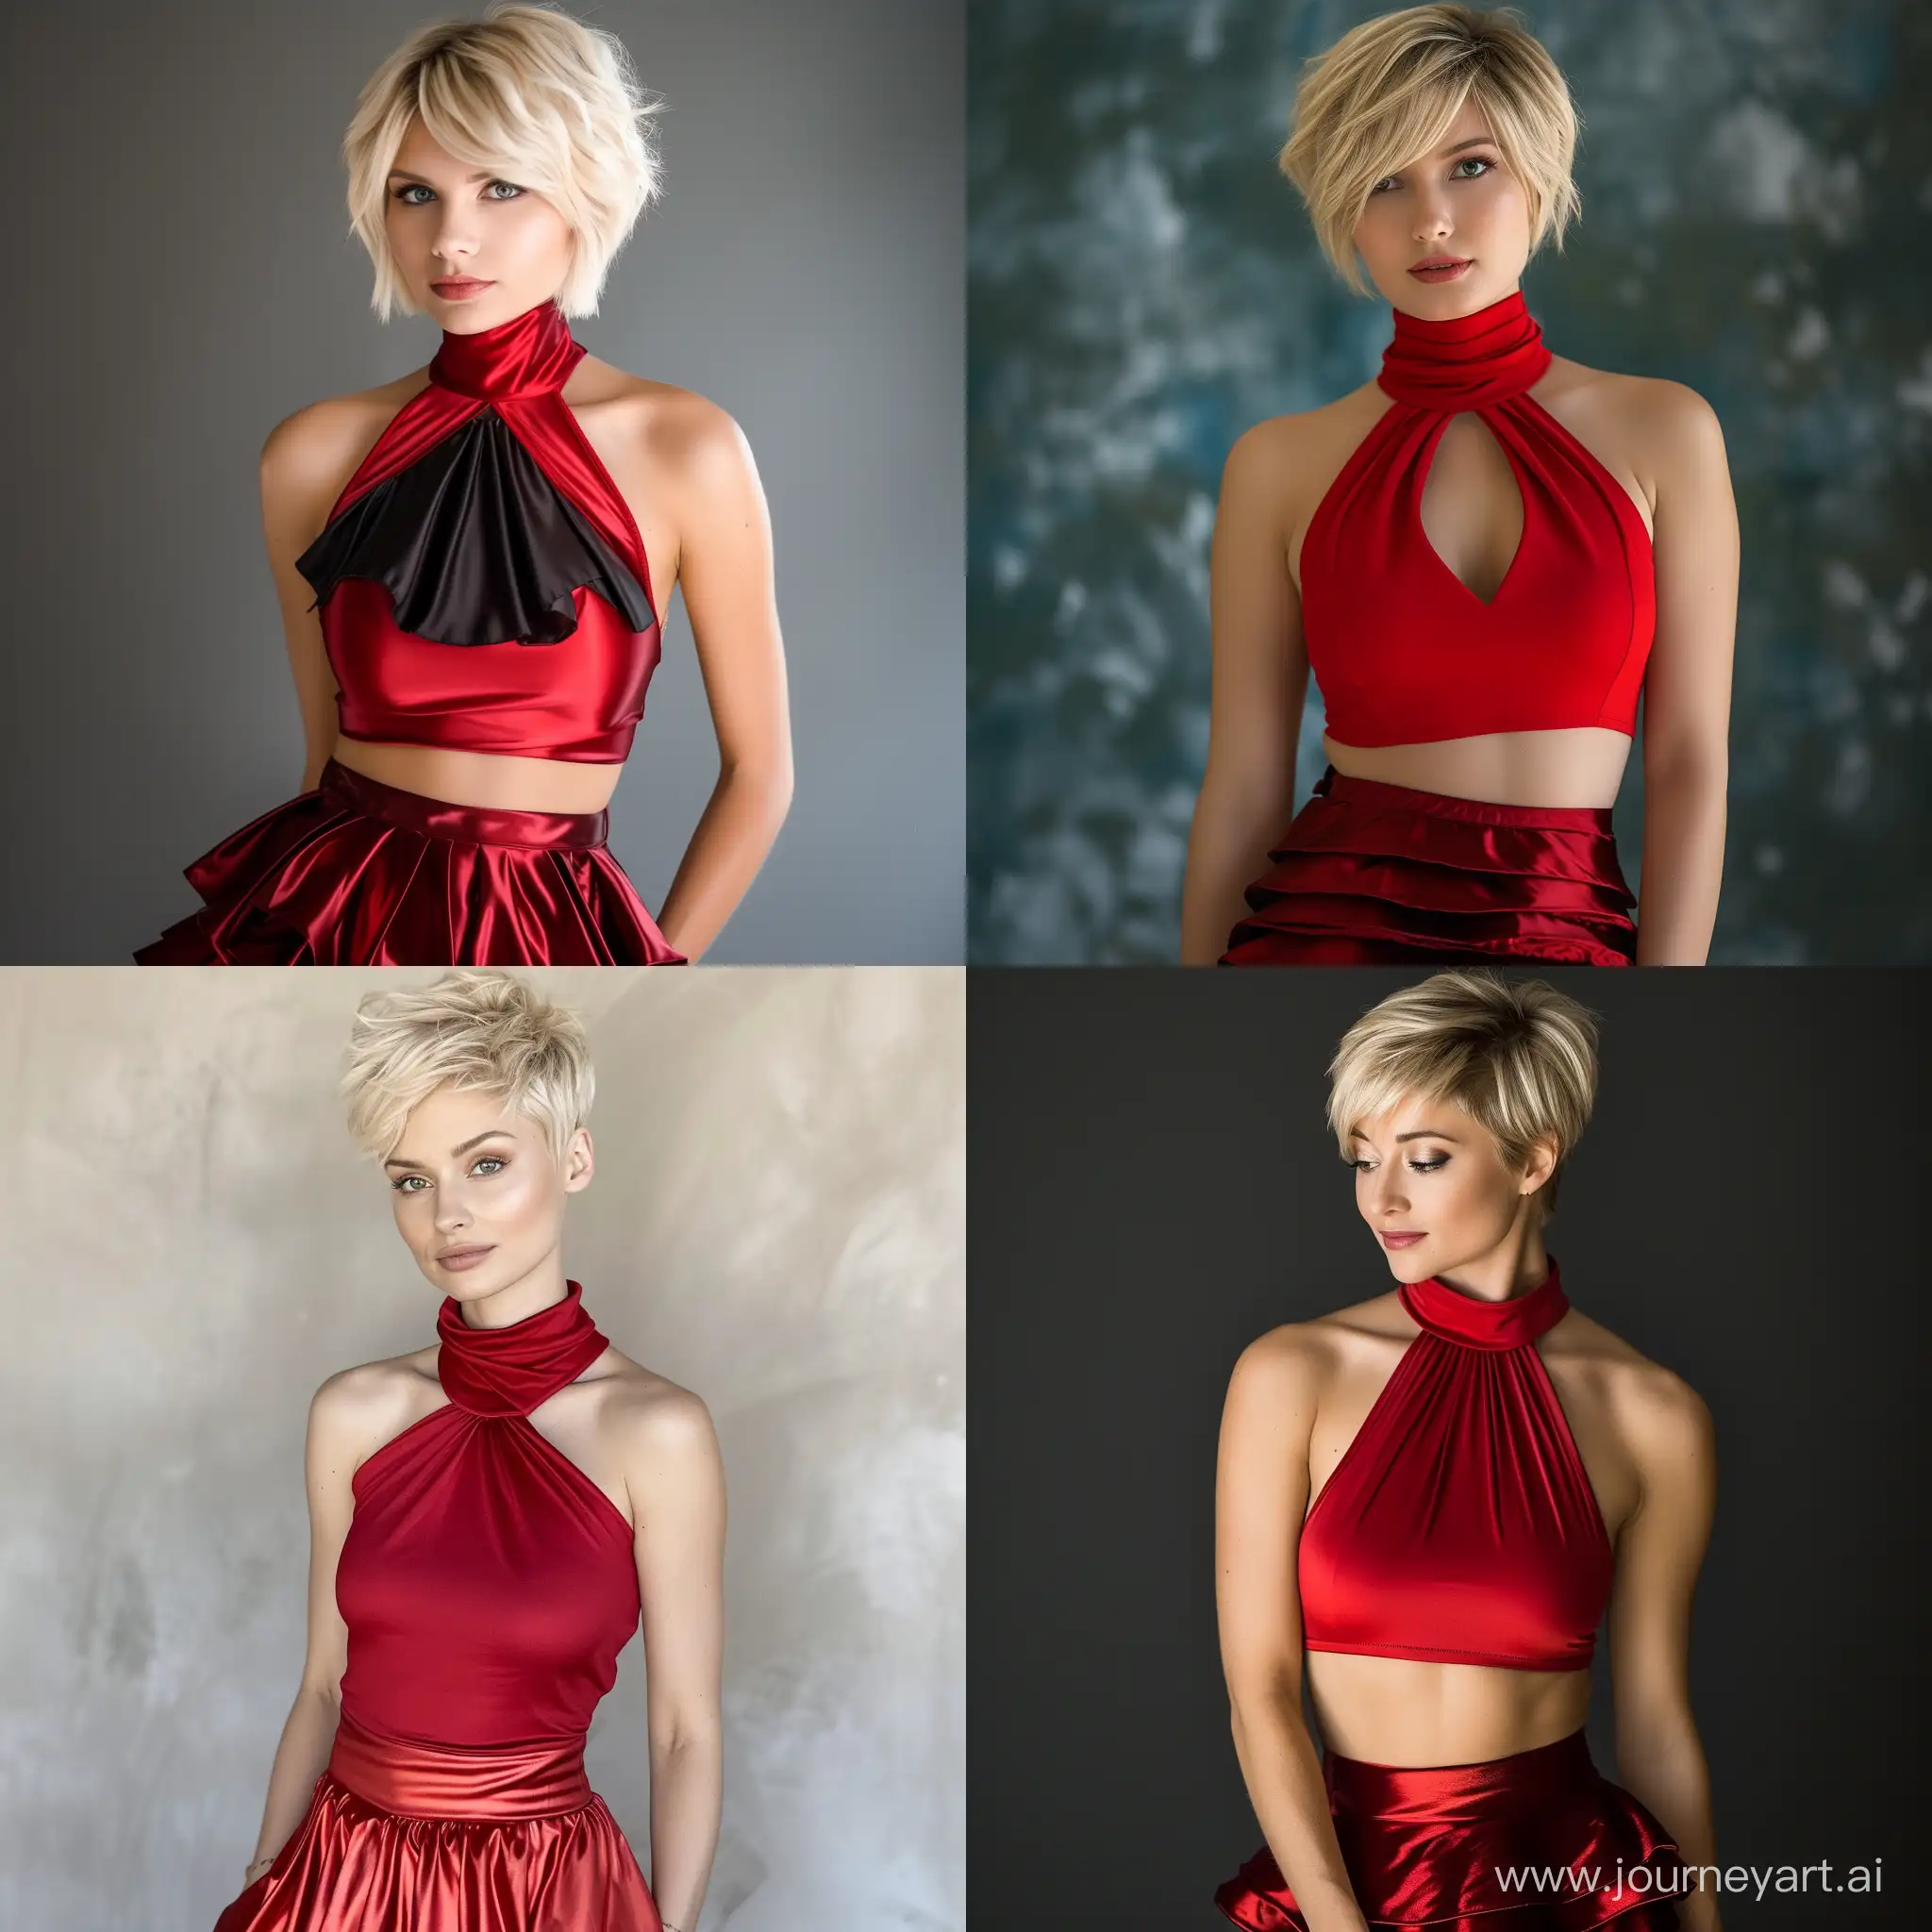 Elegant-Blonde-Woman-in-Red-Halter-Neck-and-Satin-Layered-Mini-Skirt